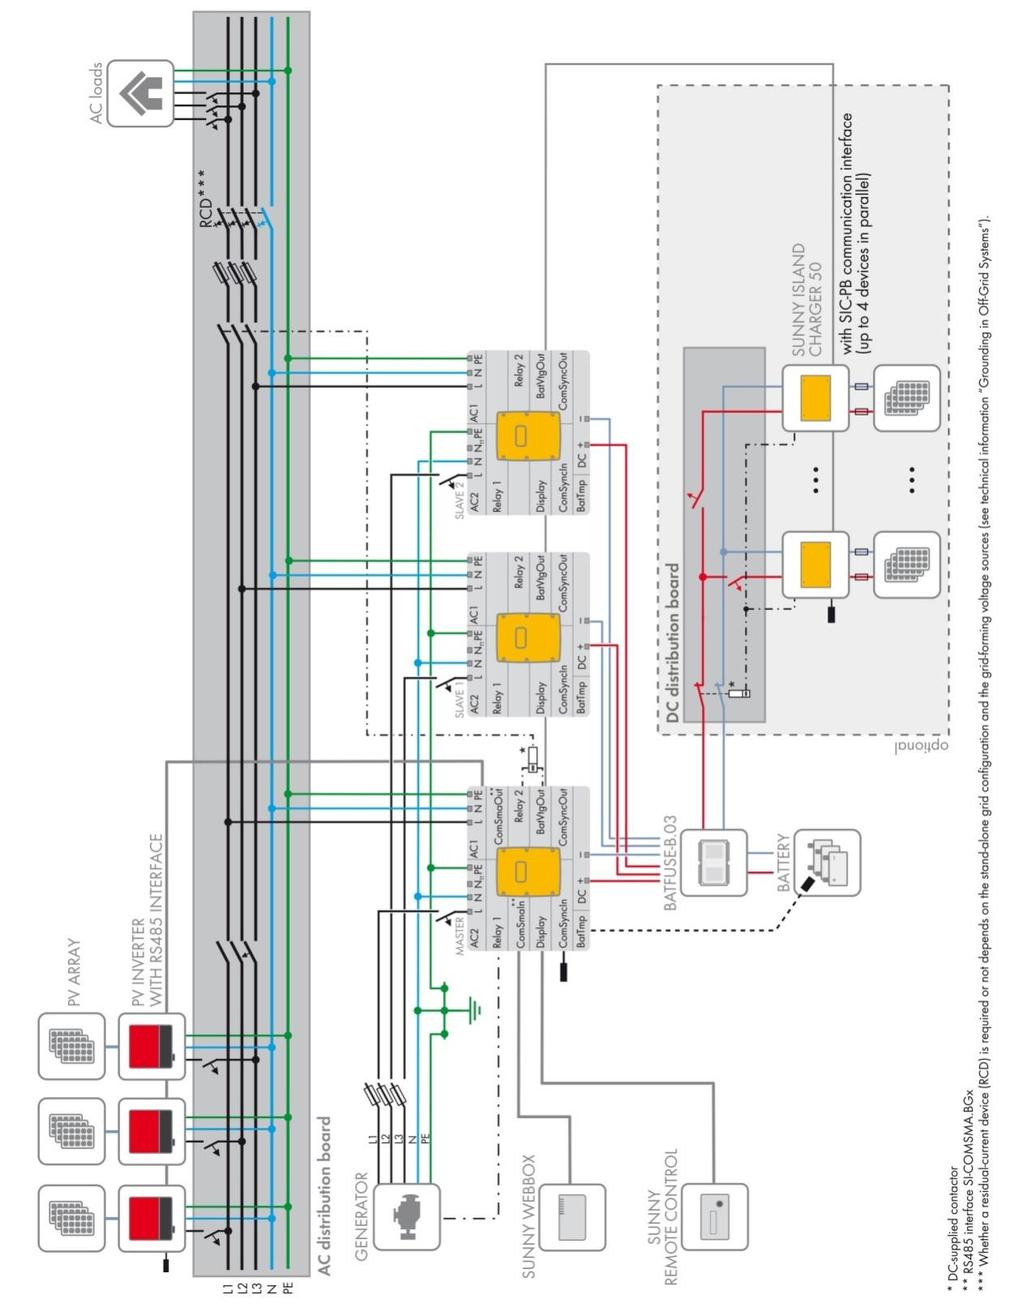 Figure 13: Circuitry overview